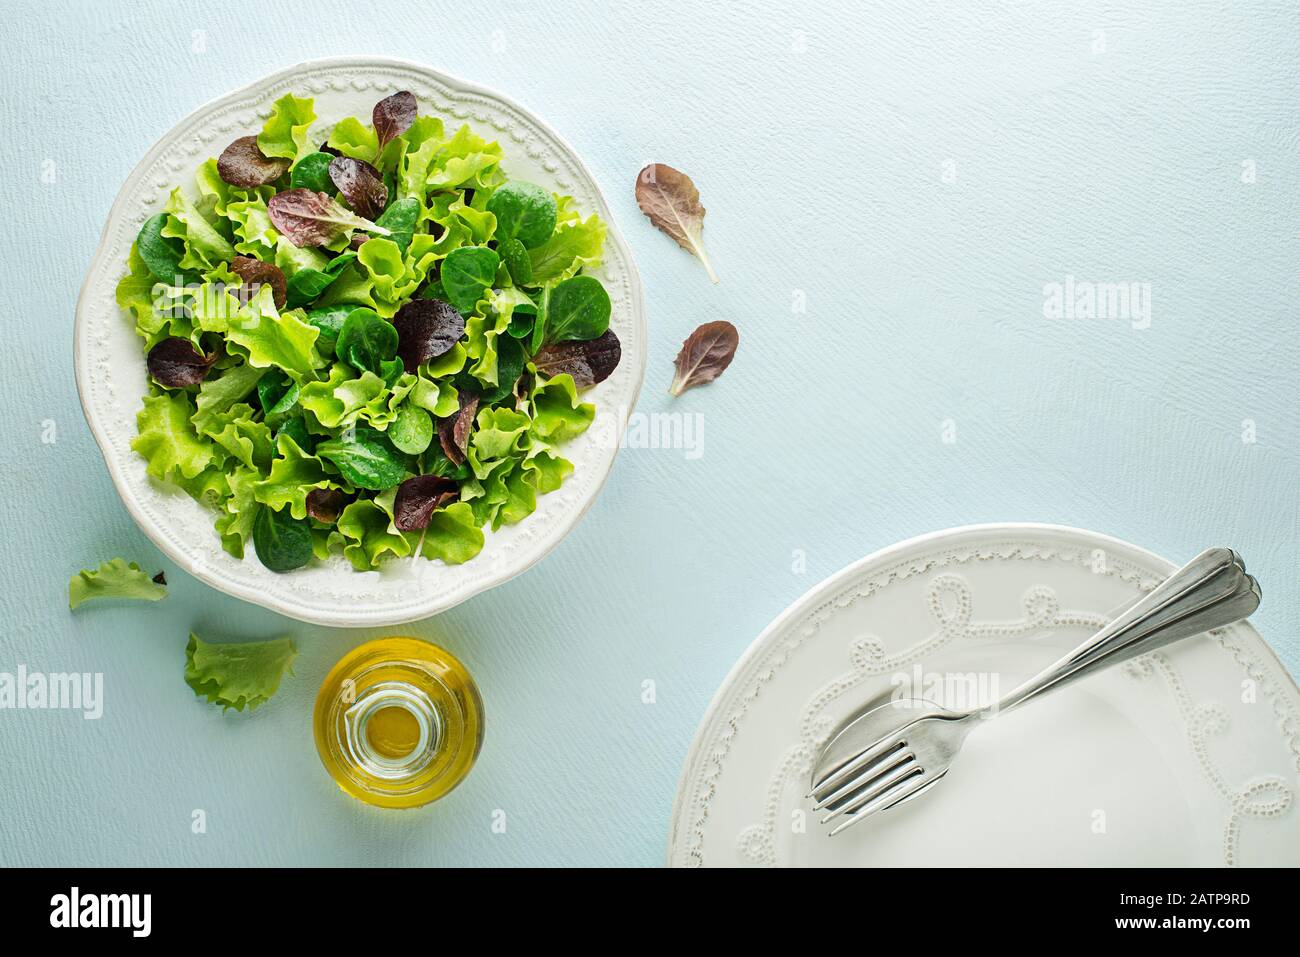 Healthy Green salad meal with fresh vegetables on blue table background Stock Photo